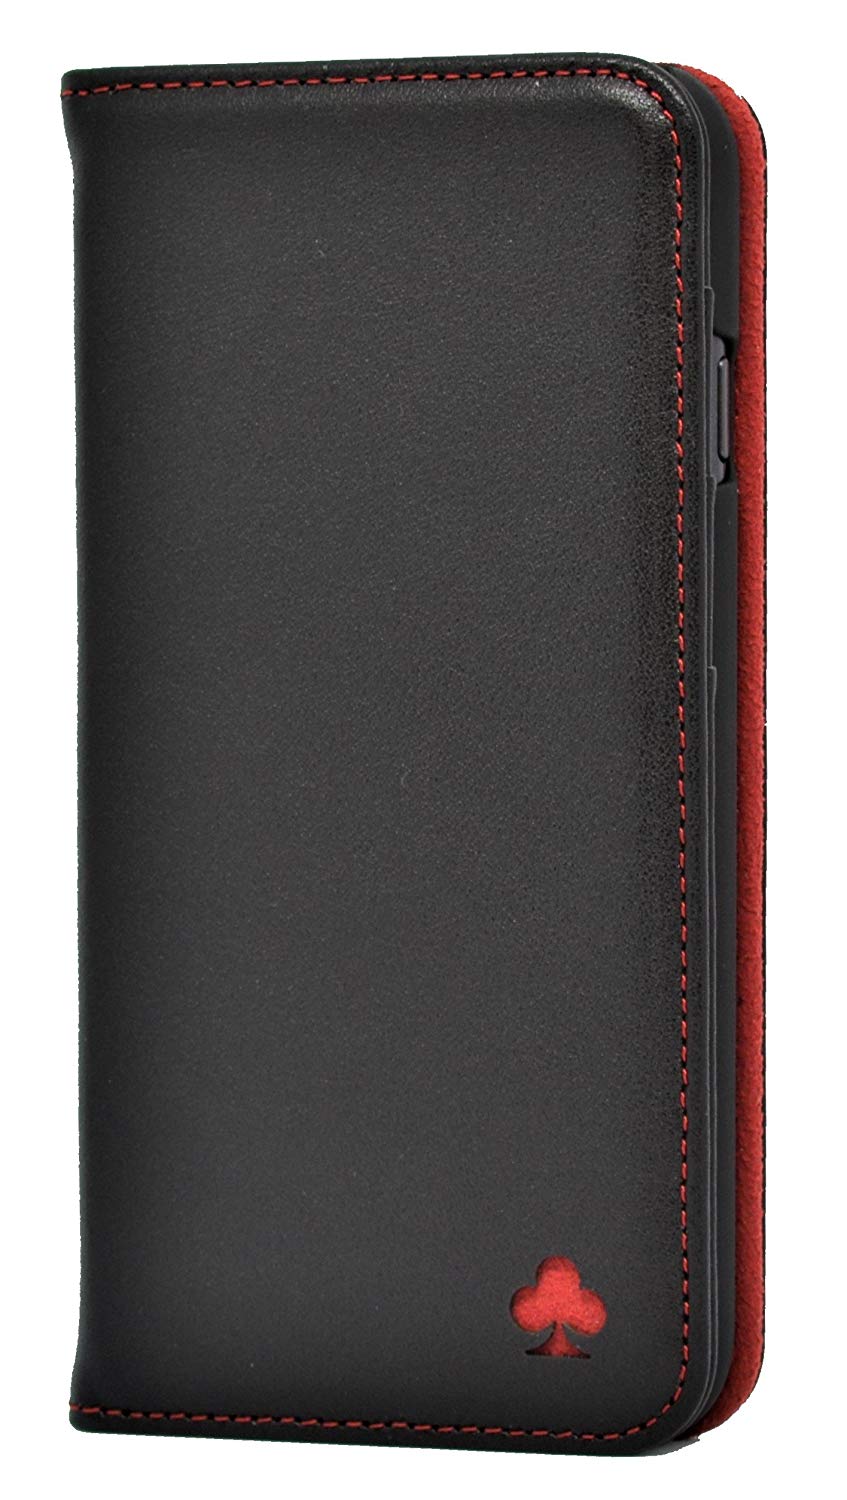 Samsung Galaxy Note 8 Leather Case. Premium Slim Genuine Leather Stand Case/Cover/Wallet (Black & Red)